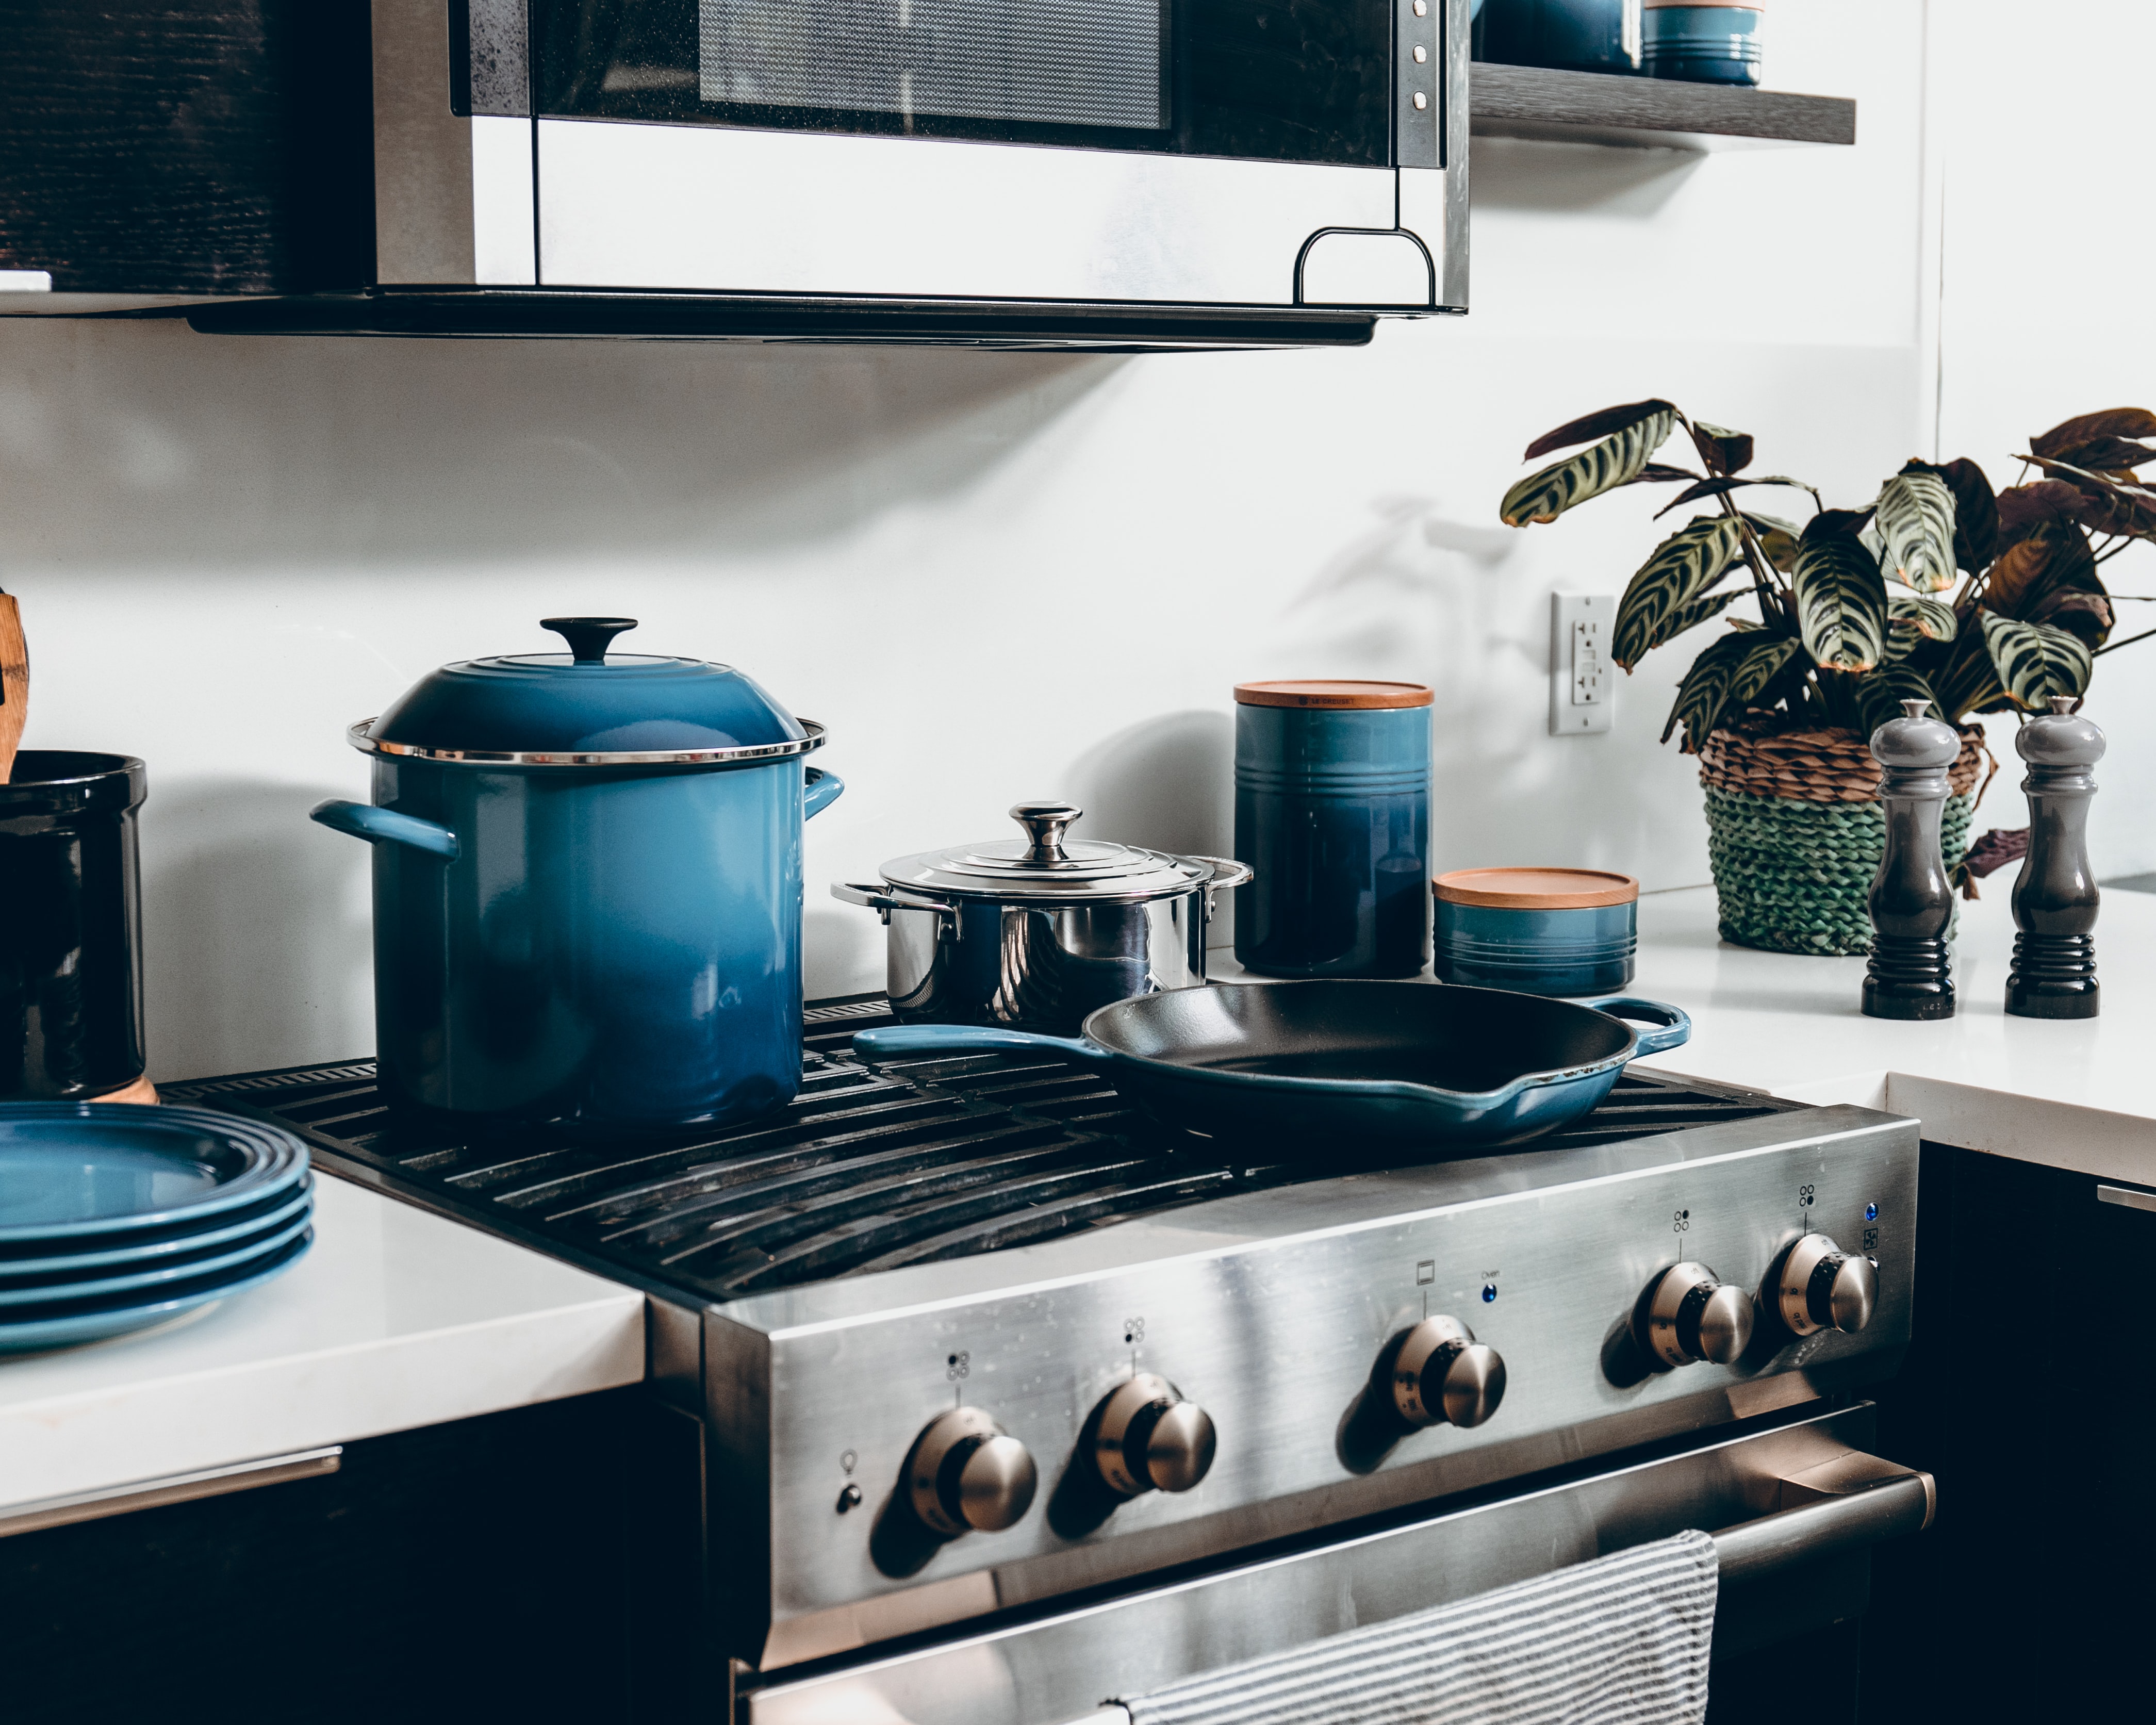 Pots and saucepans on a gas stove top